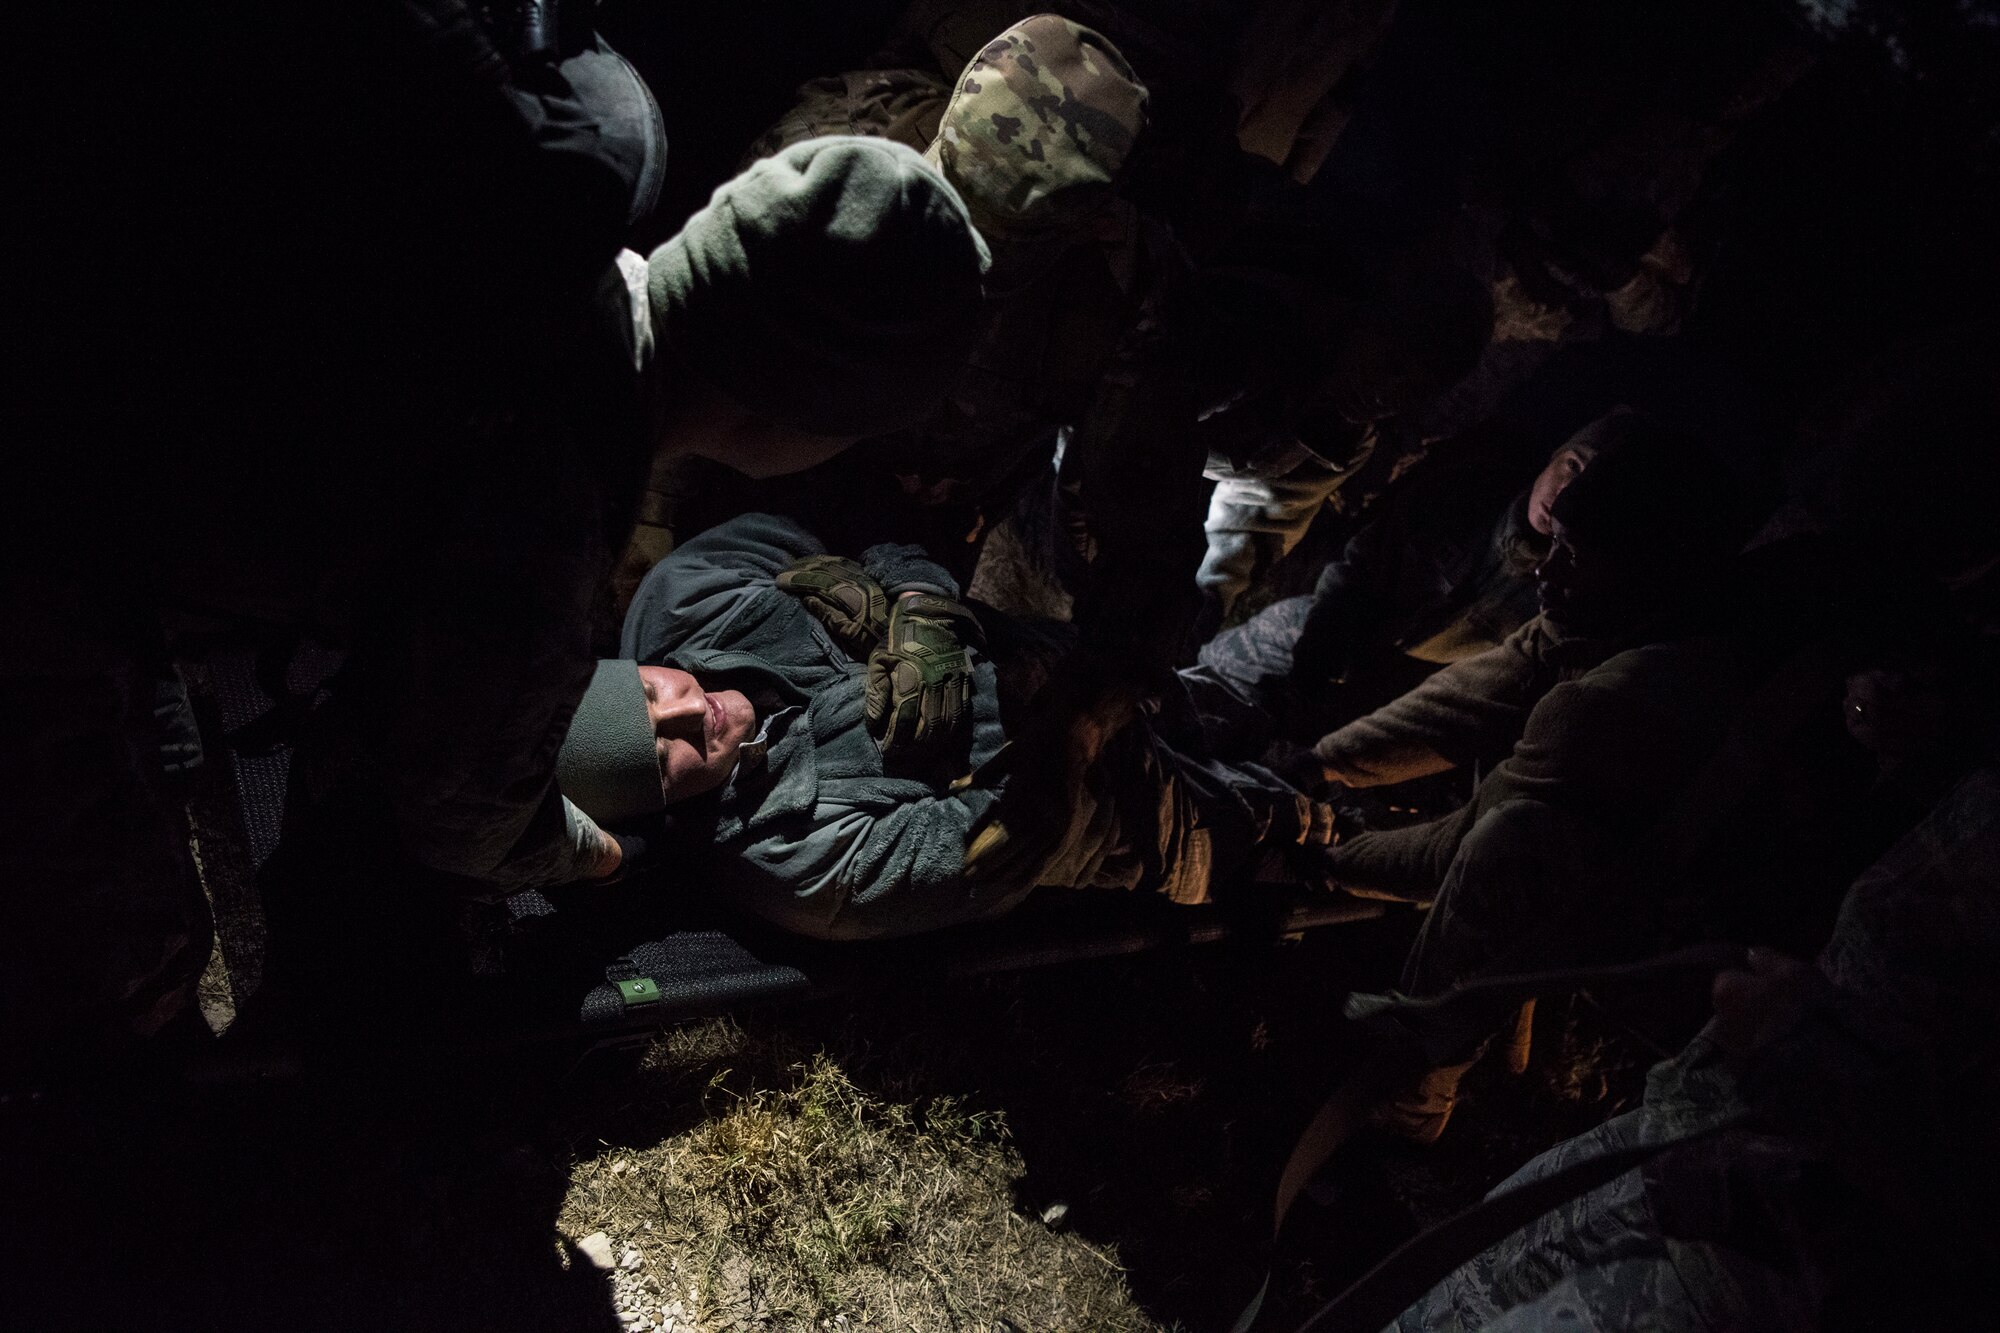 A team of Airmen assigned to the 47th Operational Medical Readiness Squadron lift an injured Airman during a readiness training exercise at Laughlin Air Force Base, Texas, Oct. 25, 2019. Medical dummies as well as one Airmen played the role of being a casualty to simulate real world scenarios as teams of Medics practiced their life saving skills. (U.S. Air Force photo by Senior Airman Marco A. Gomez)